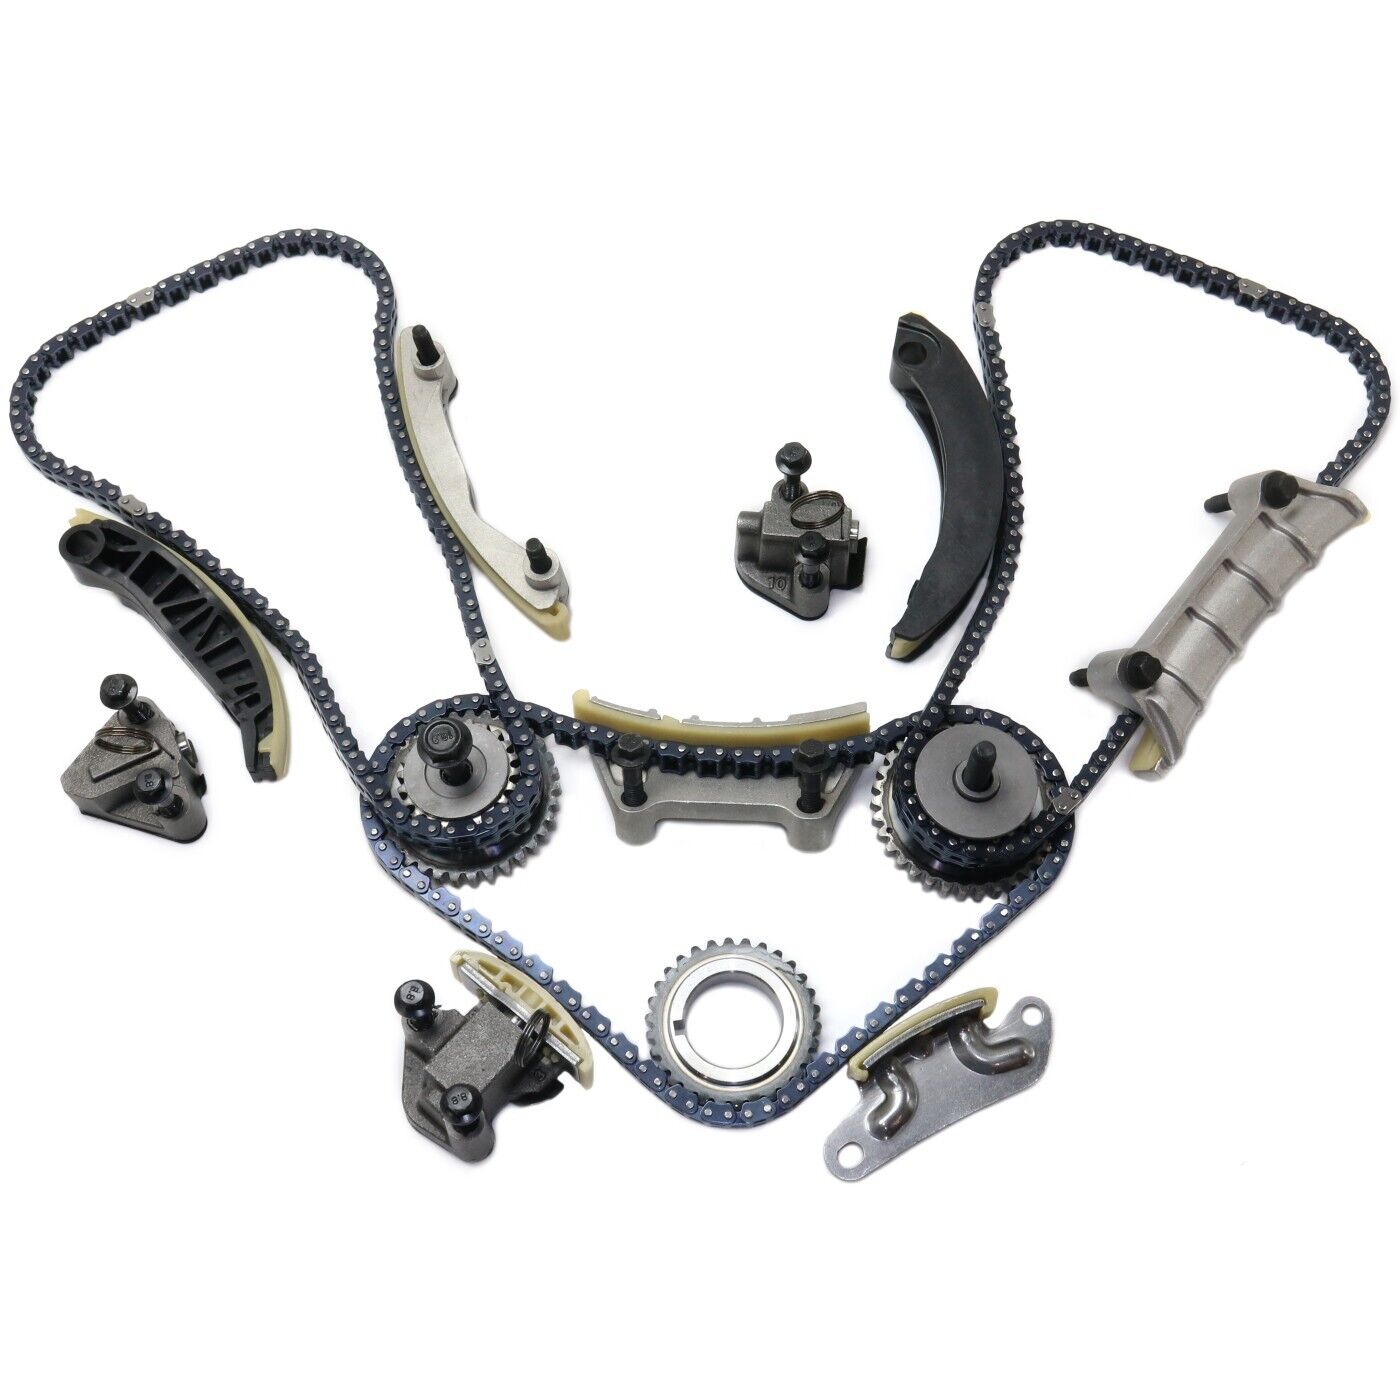 Kit Timing Chain Front for Chevy Chevrolet Impala Buick Enclave Traverse XTS GMC